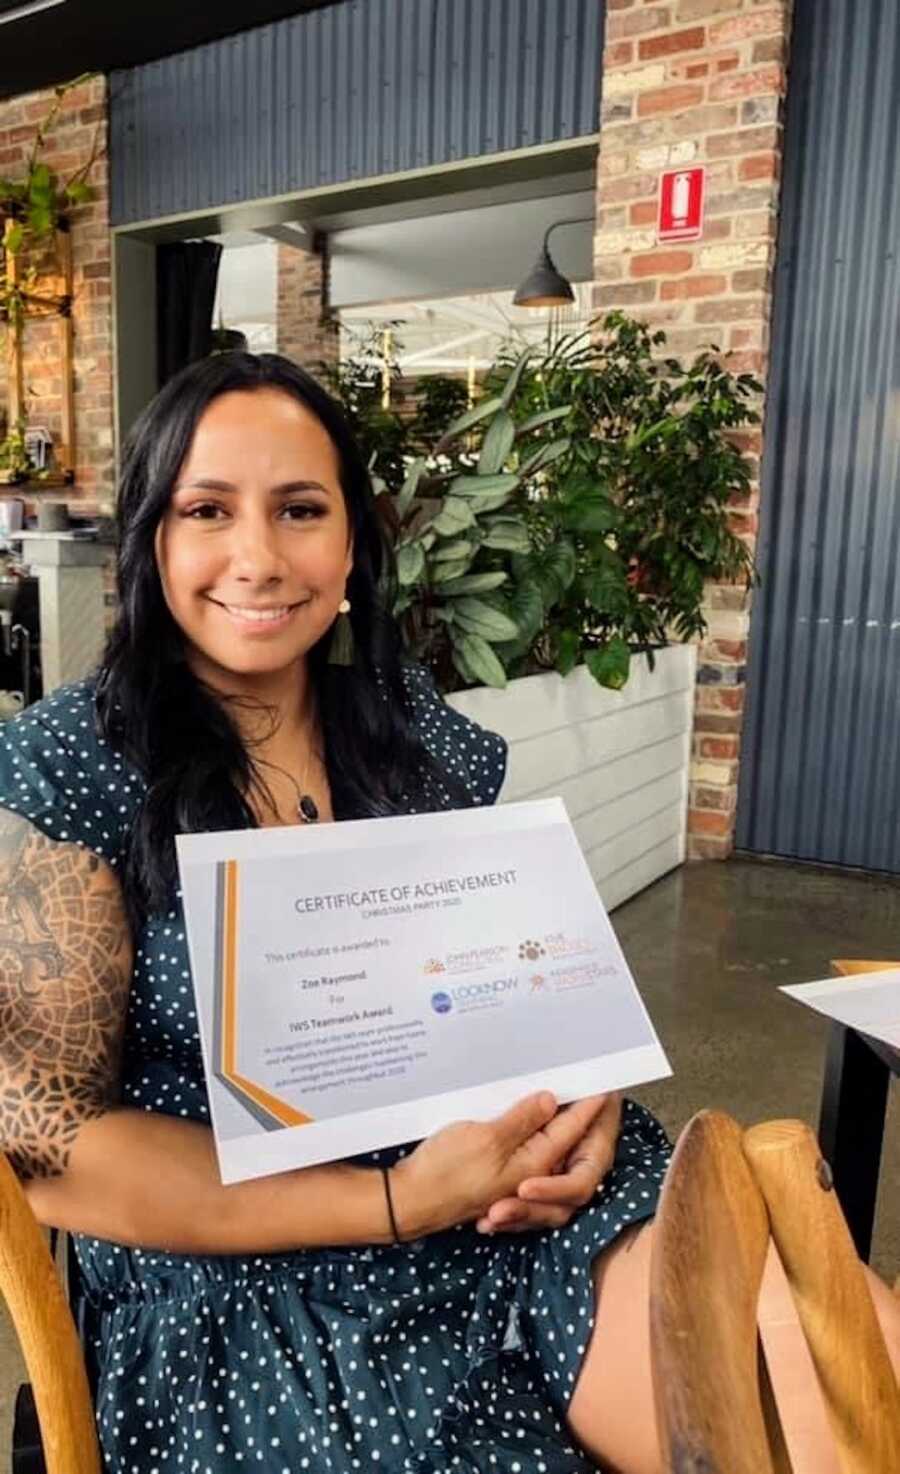 Aboriginal woman sitting and holding an achievement certificate